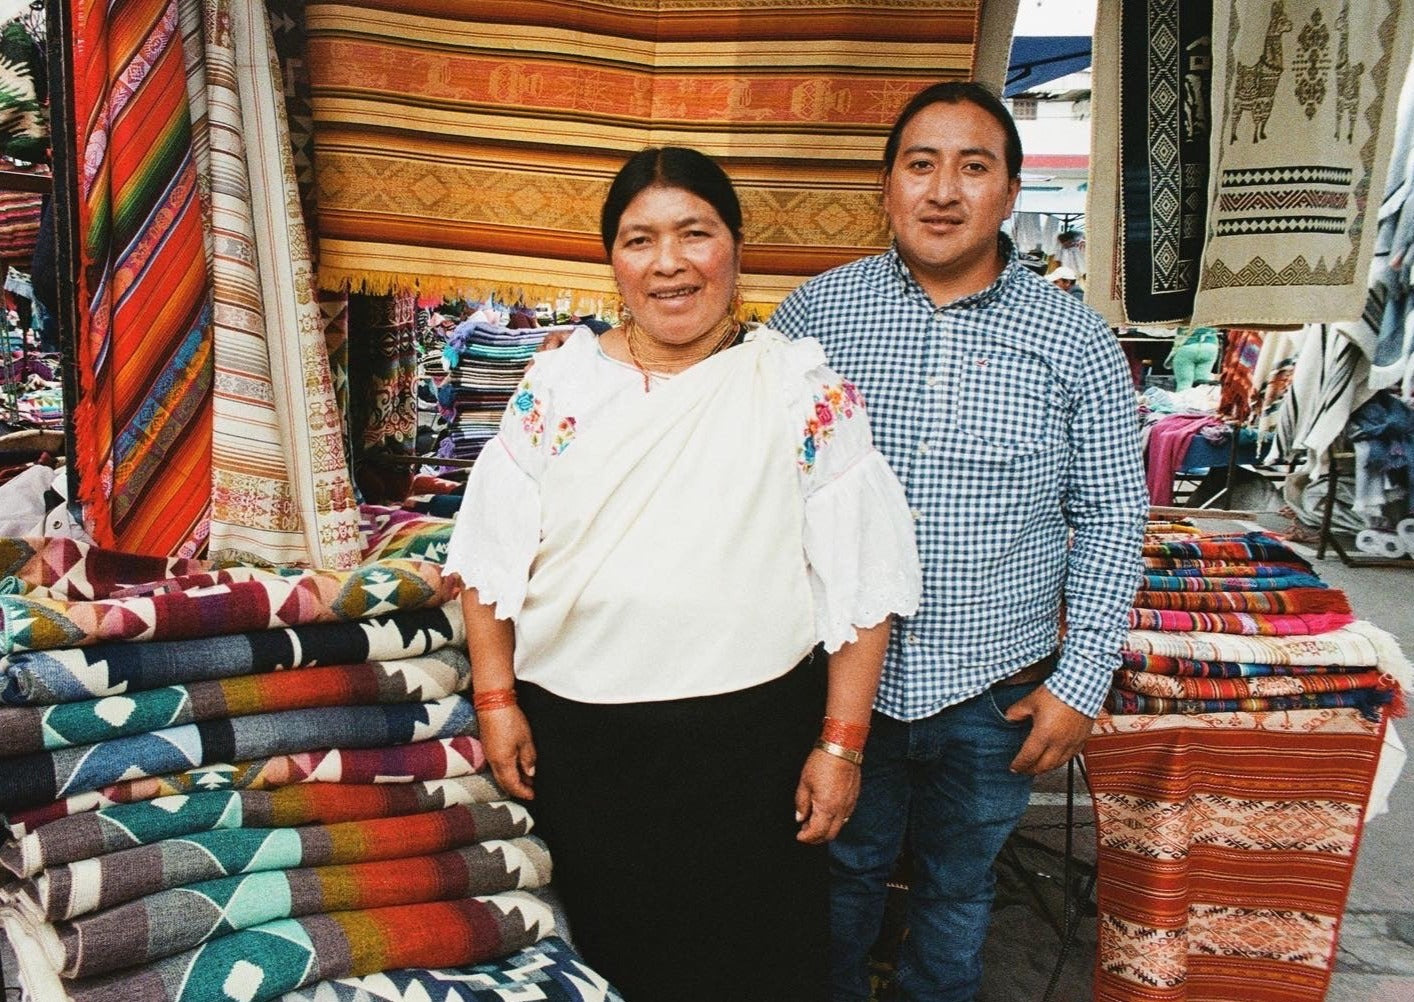 artisans of Ecuador captured on film at a market in Otavalo surrounded by their handmade alpaca blankets